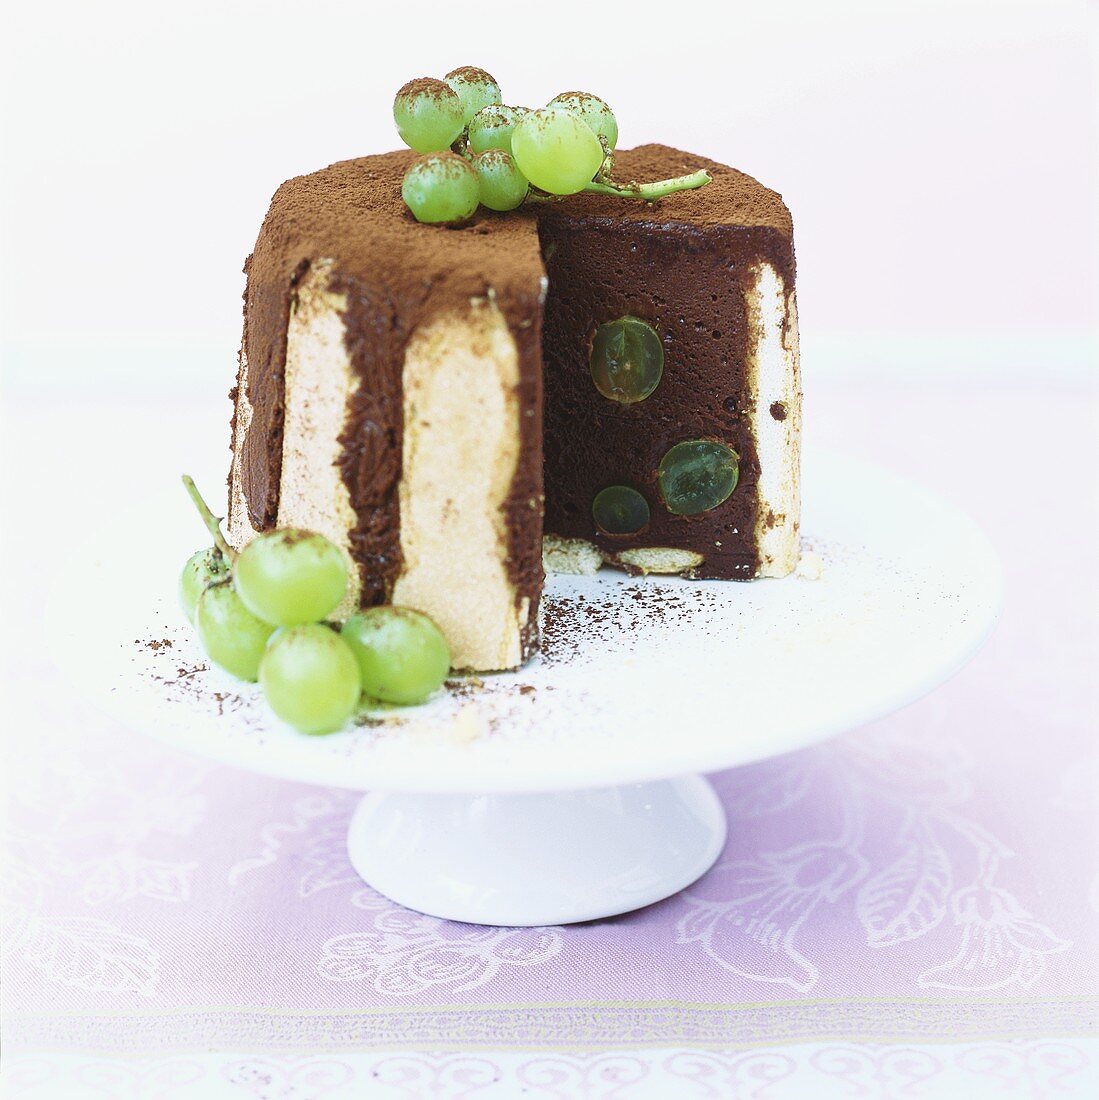 Chocolate charlotte with grapes